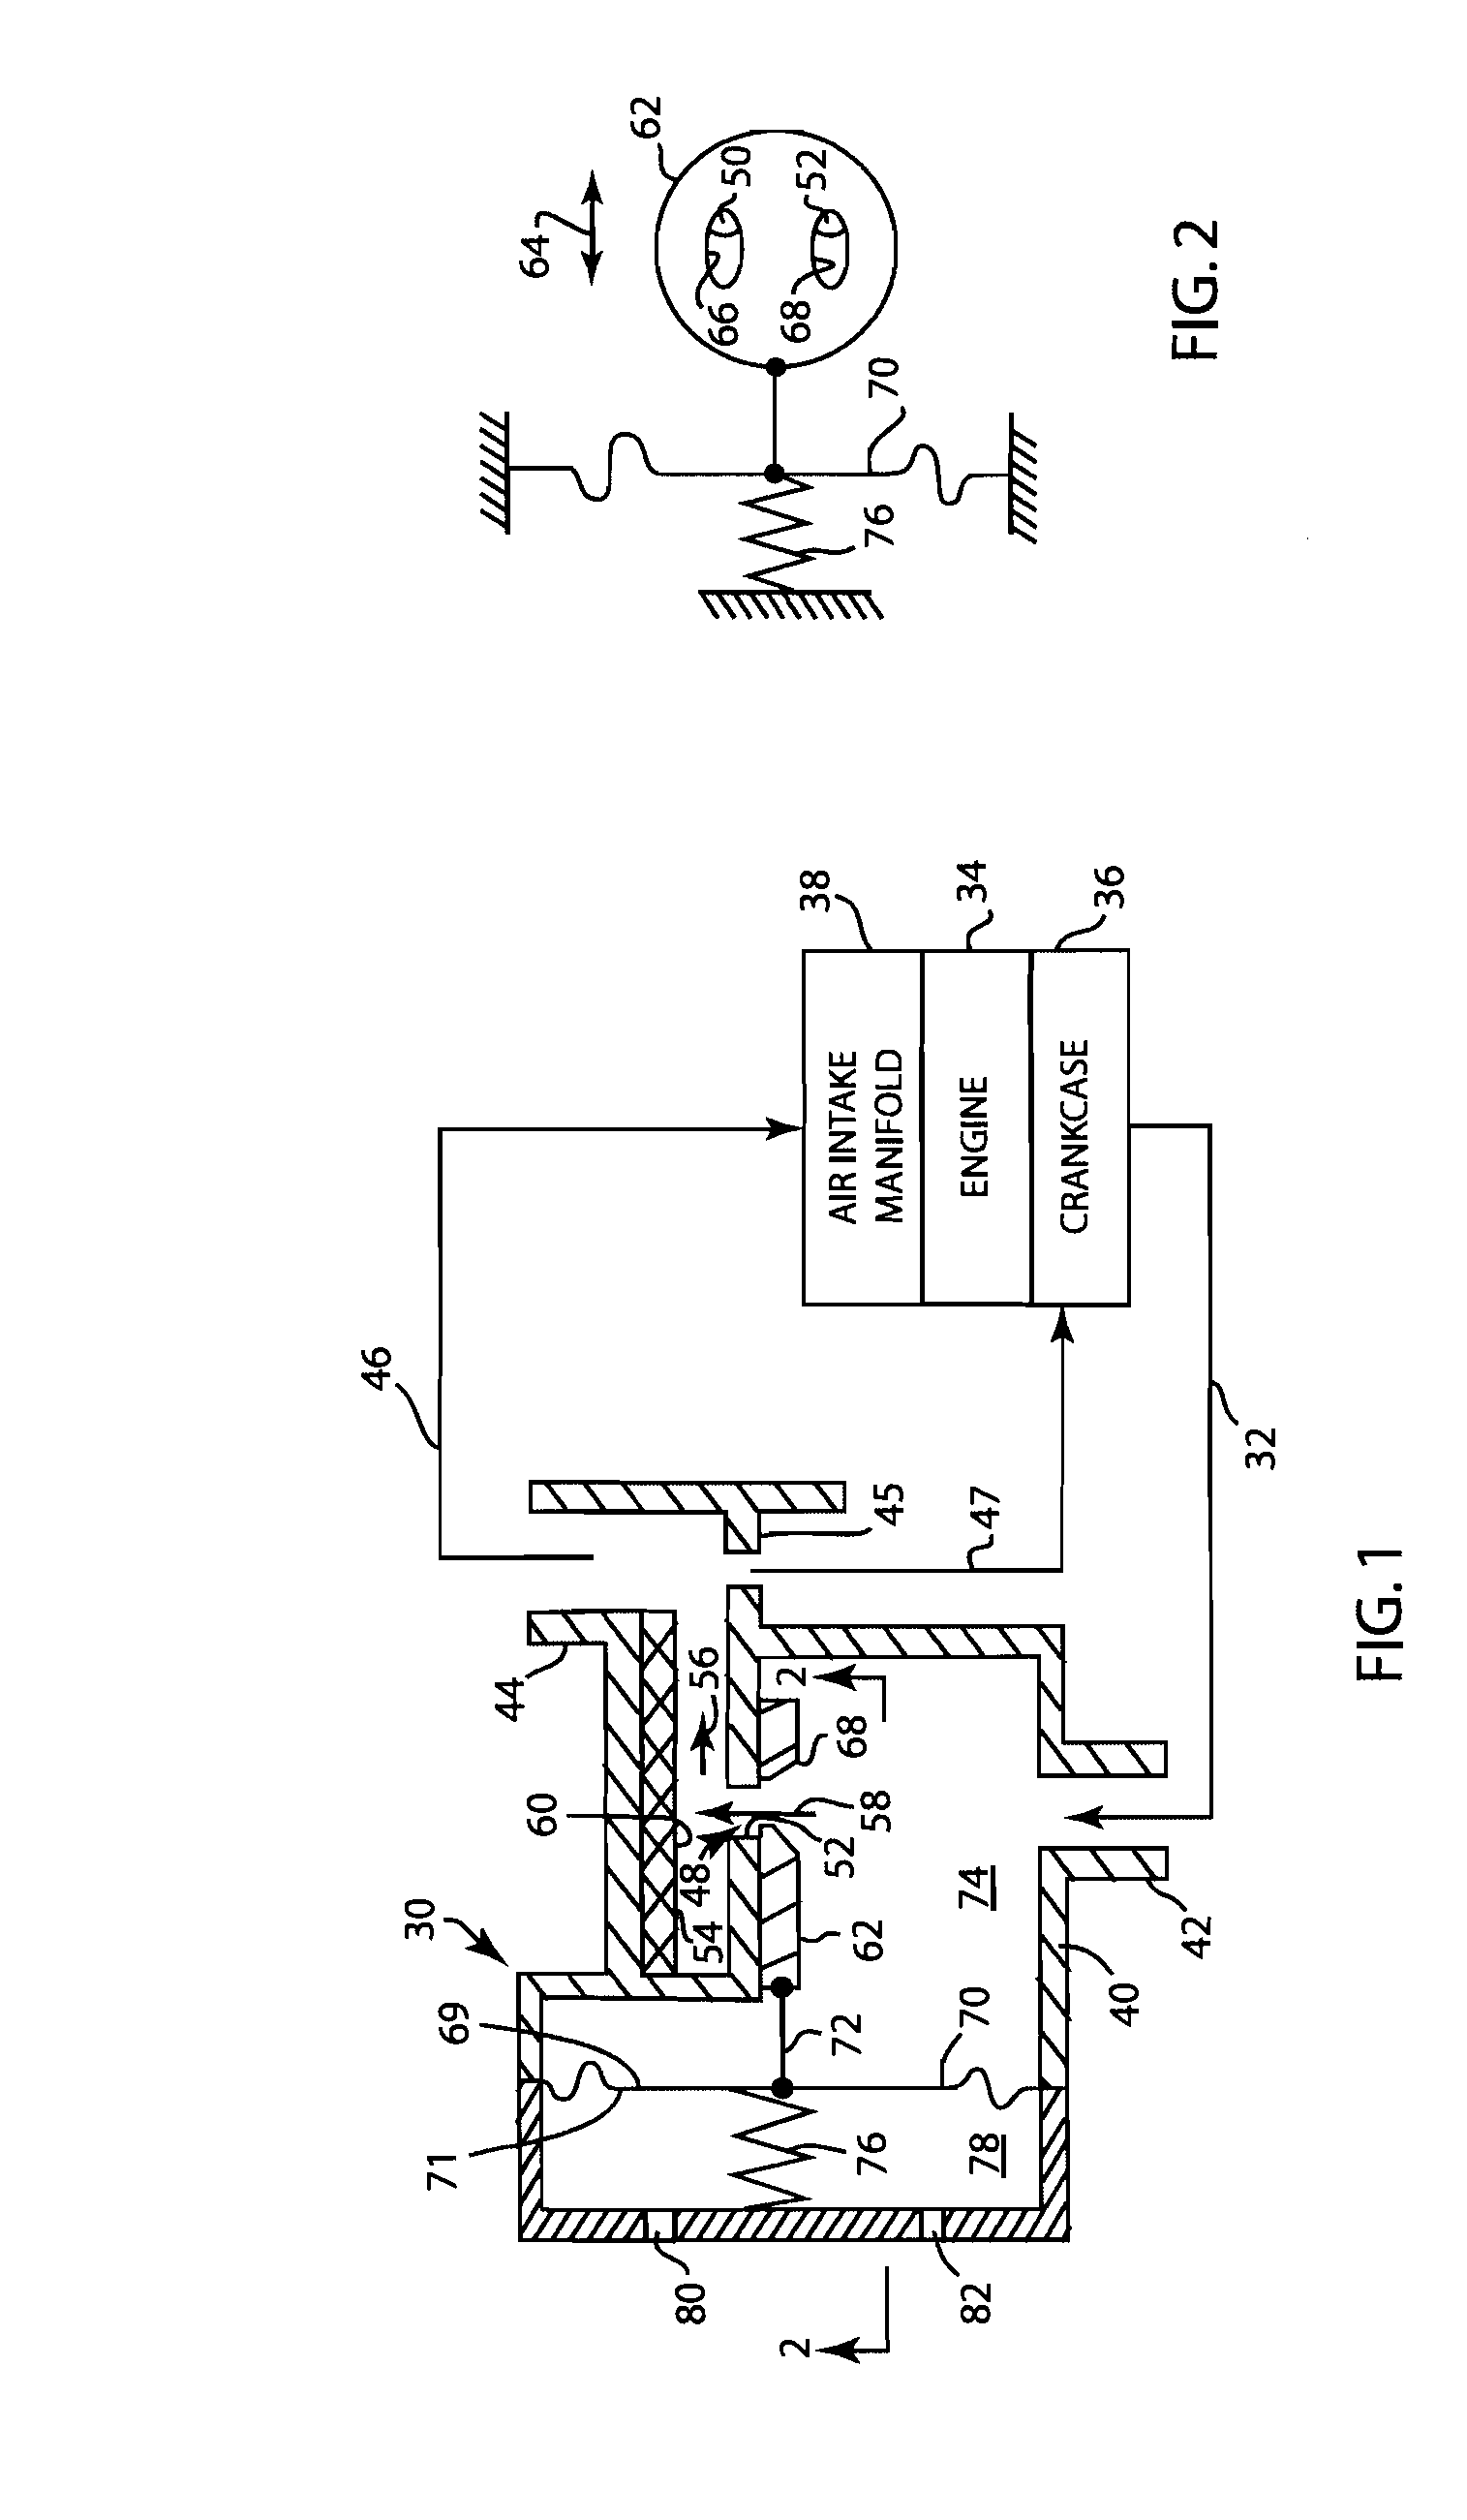 Multistage Variable Impactor